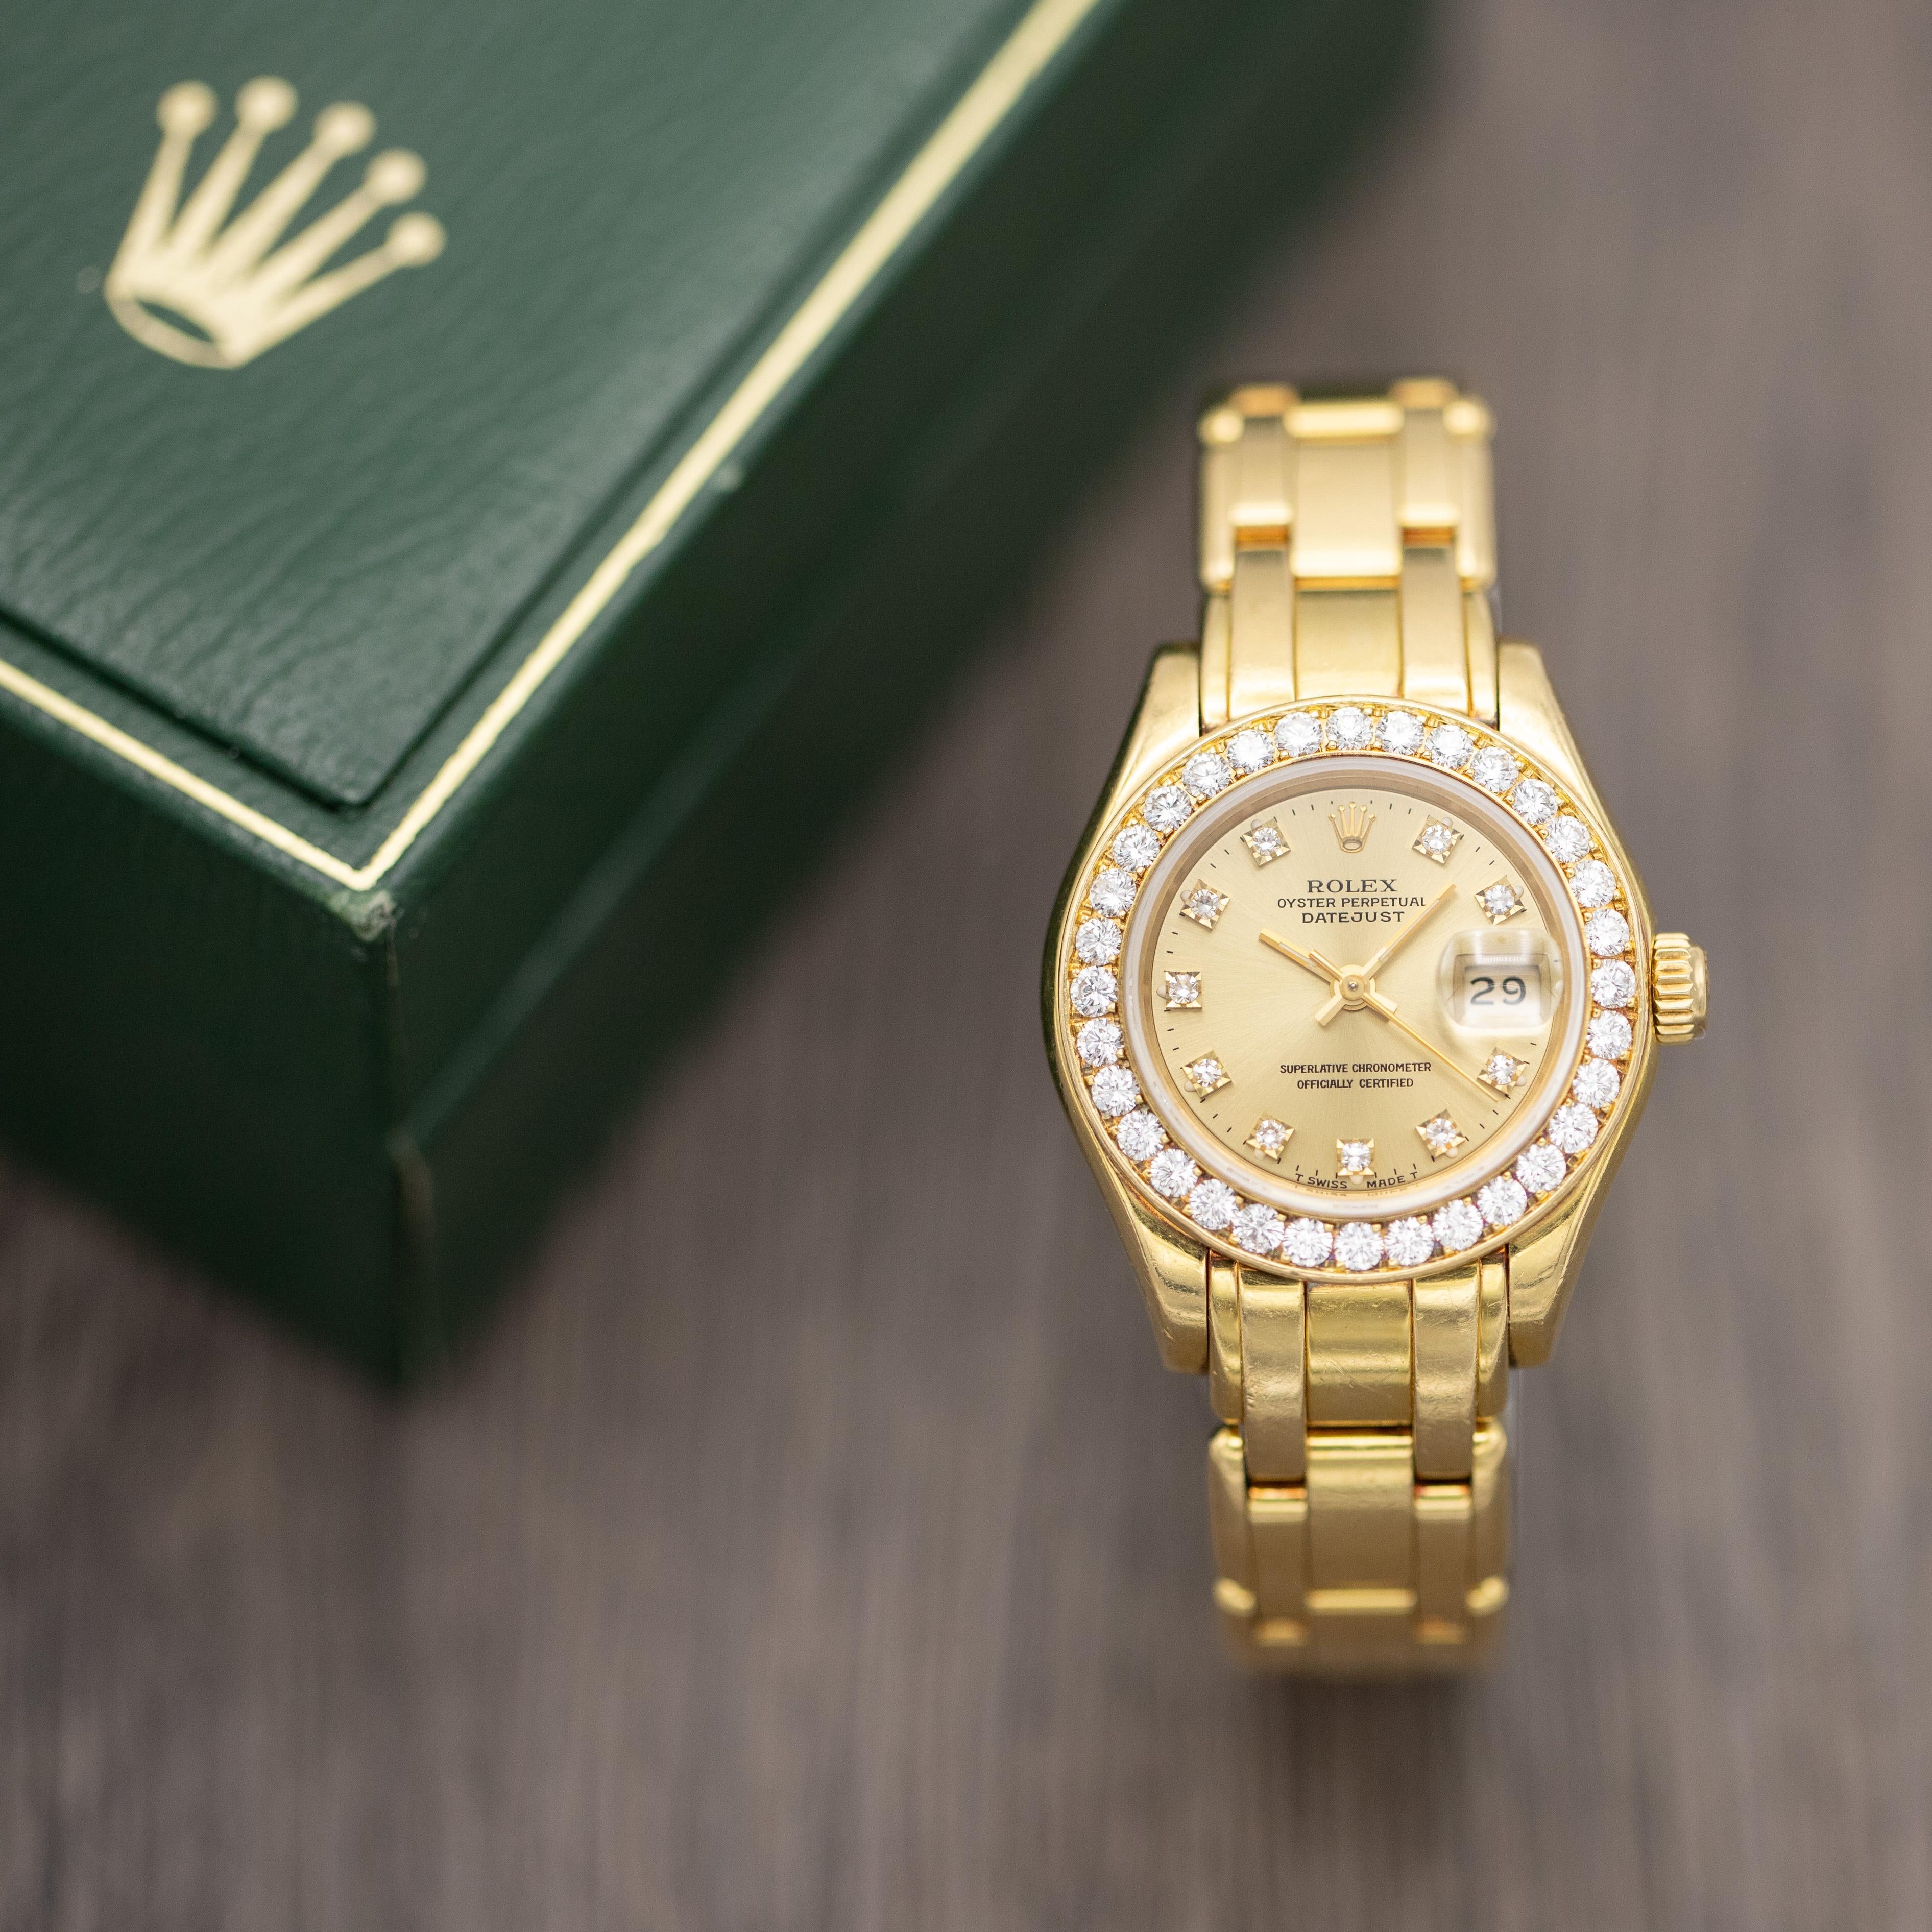 For sale is a Swiss Made Rolex Oyster Perpetual Lady Datejust Pearlmaster with reference number 69298, dating back to 1991 based on its serial number. As Rolex puts it, it is a feminine reinterpretation of Rolex’s emblematic Datejust. This stunning